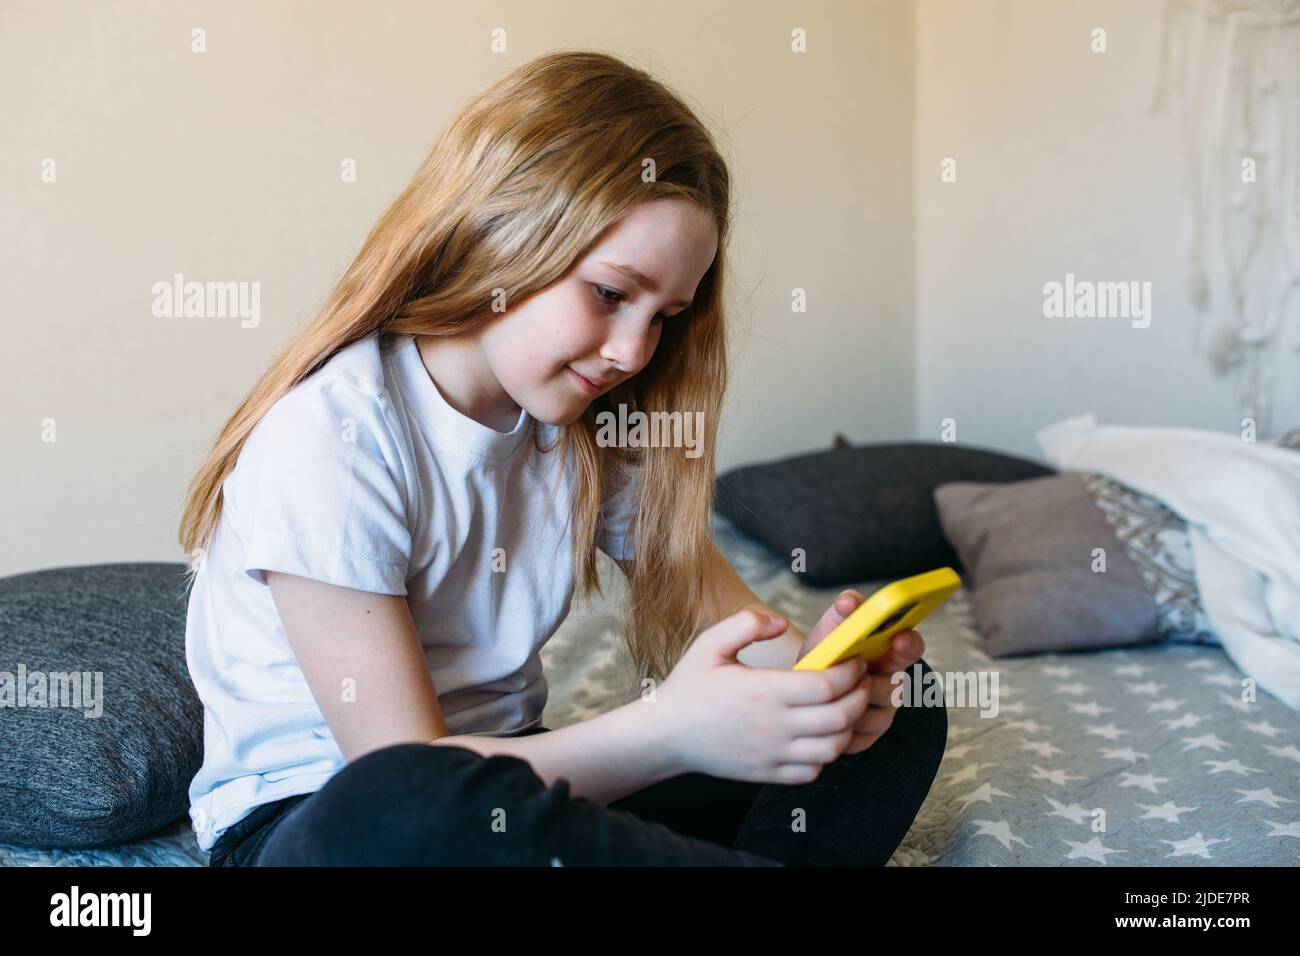 Girl child at home on the couch uses a smartphone Stock Photo